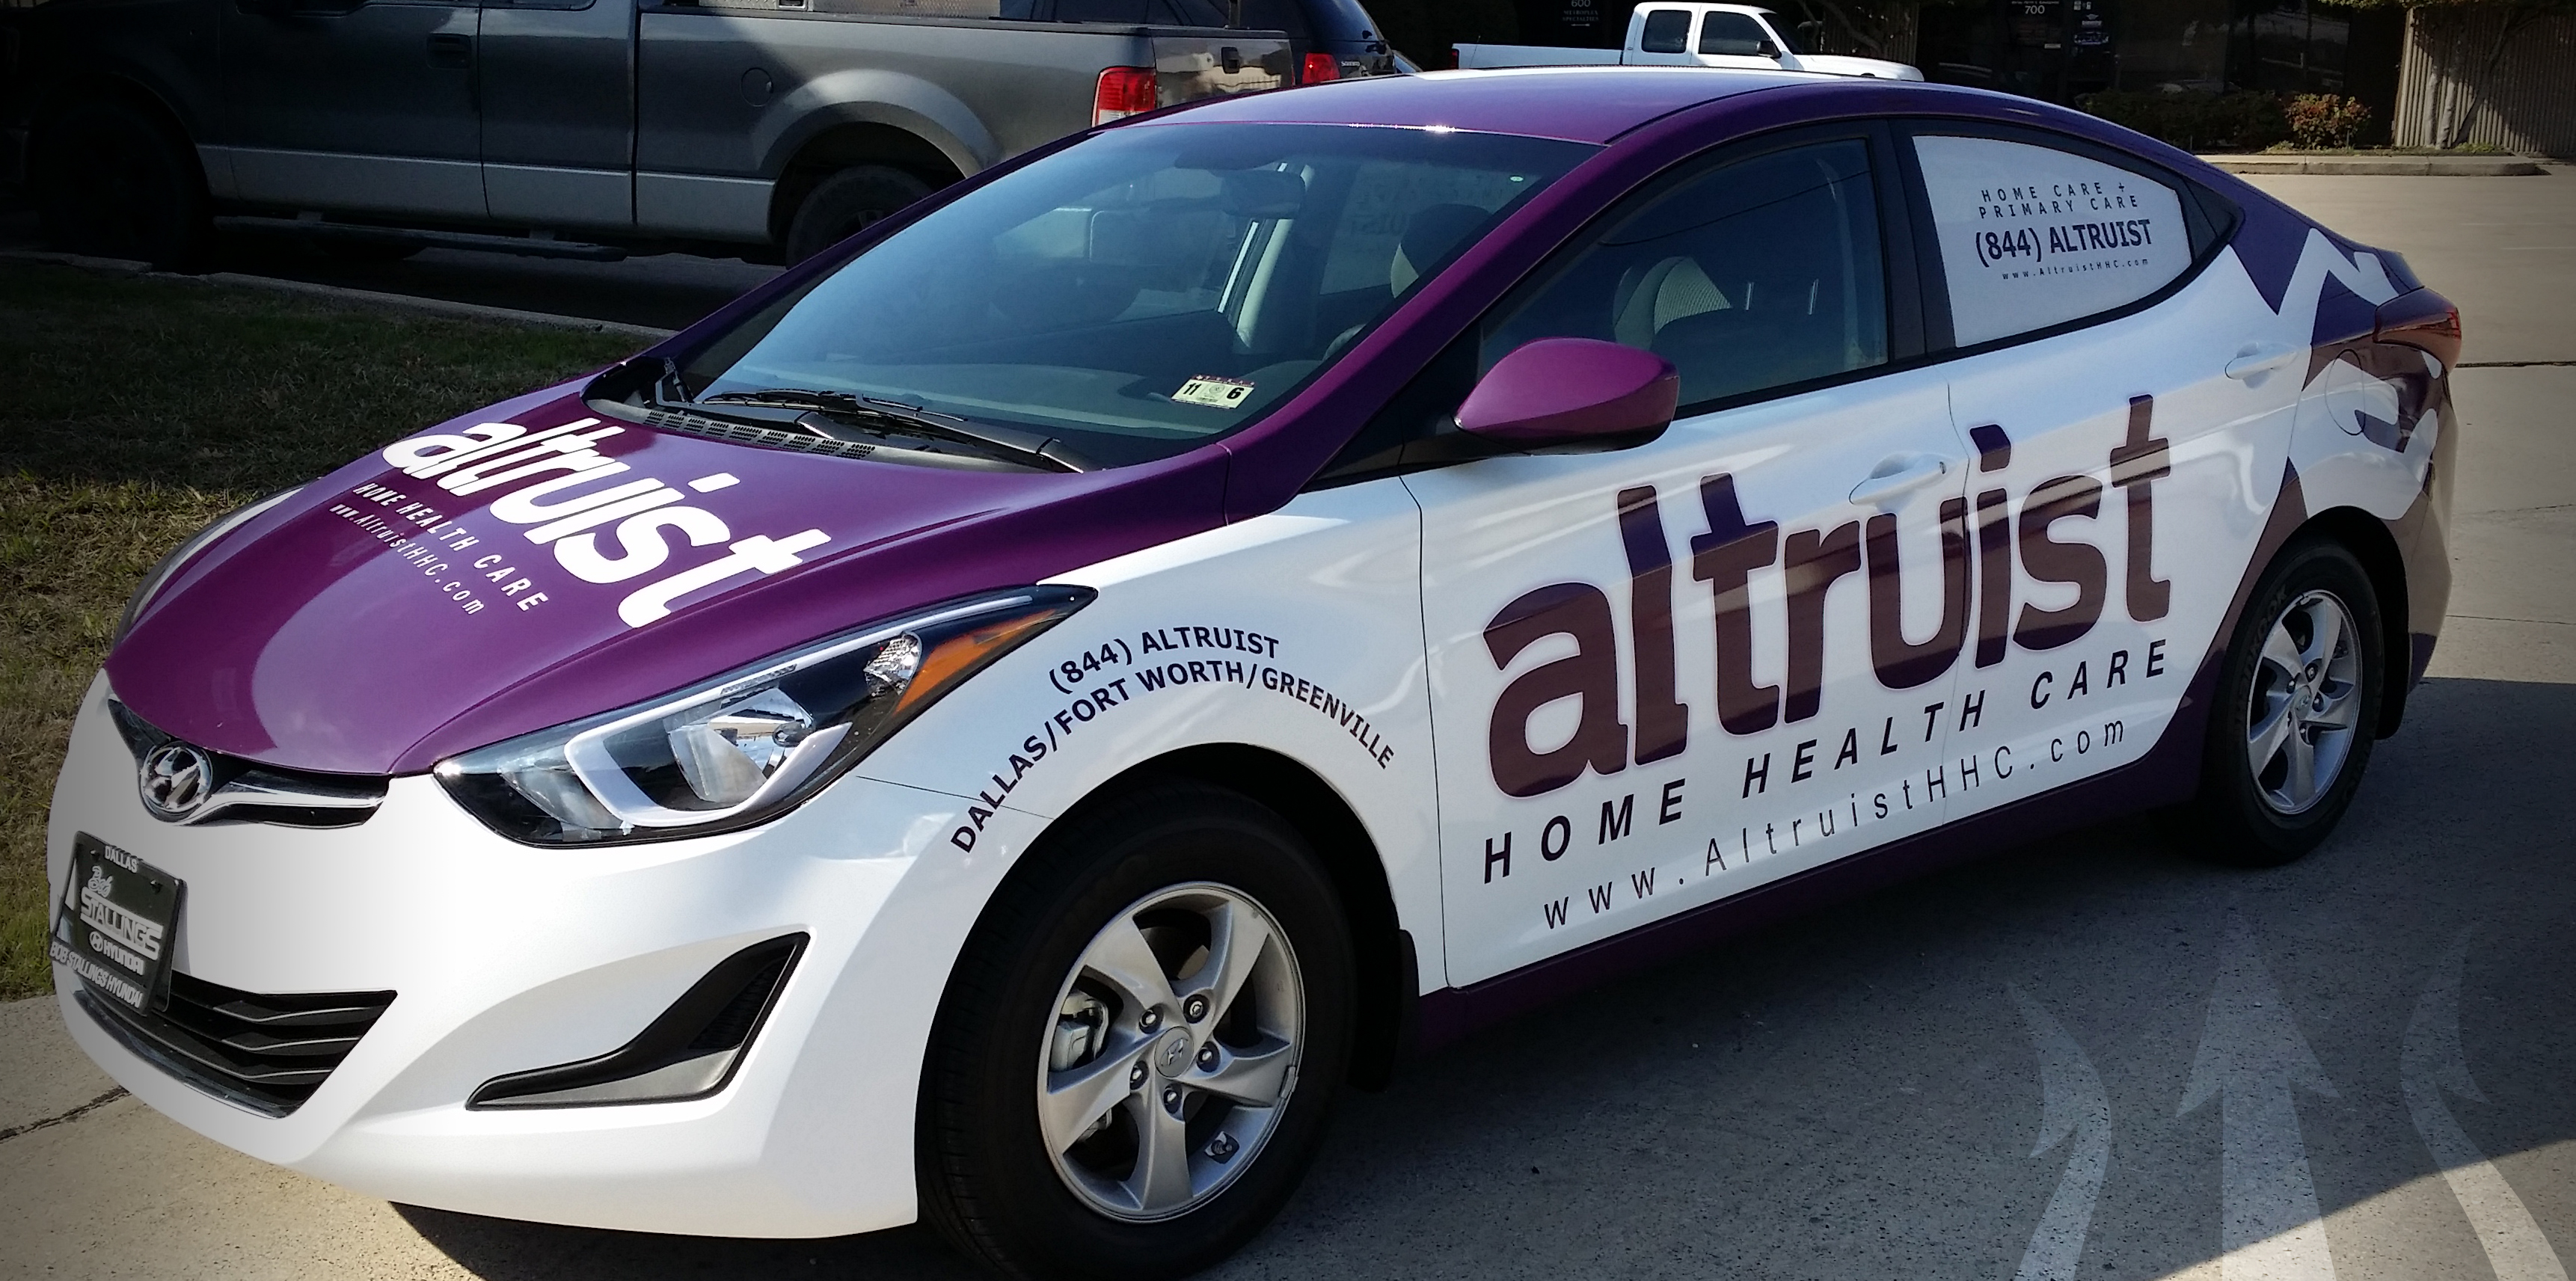 Car Graphics in DFW, Dallas, TX, Lewisville, TX, Plano, TX, Frisco, TX, and Surrounding Areas